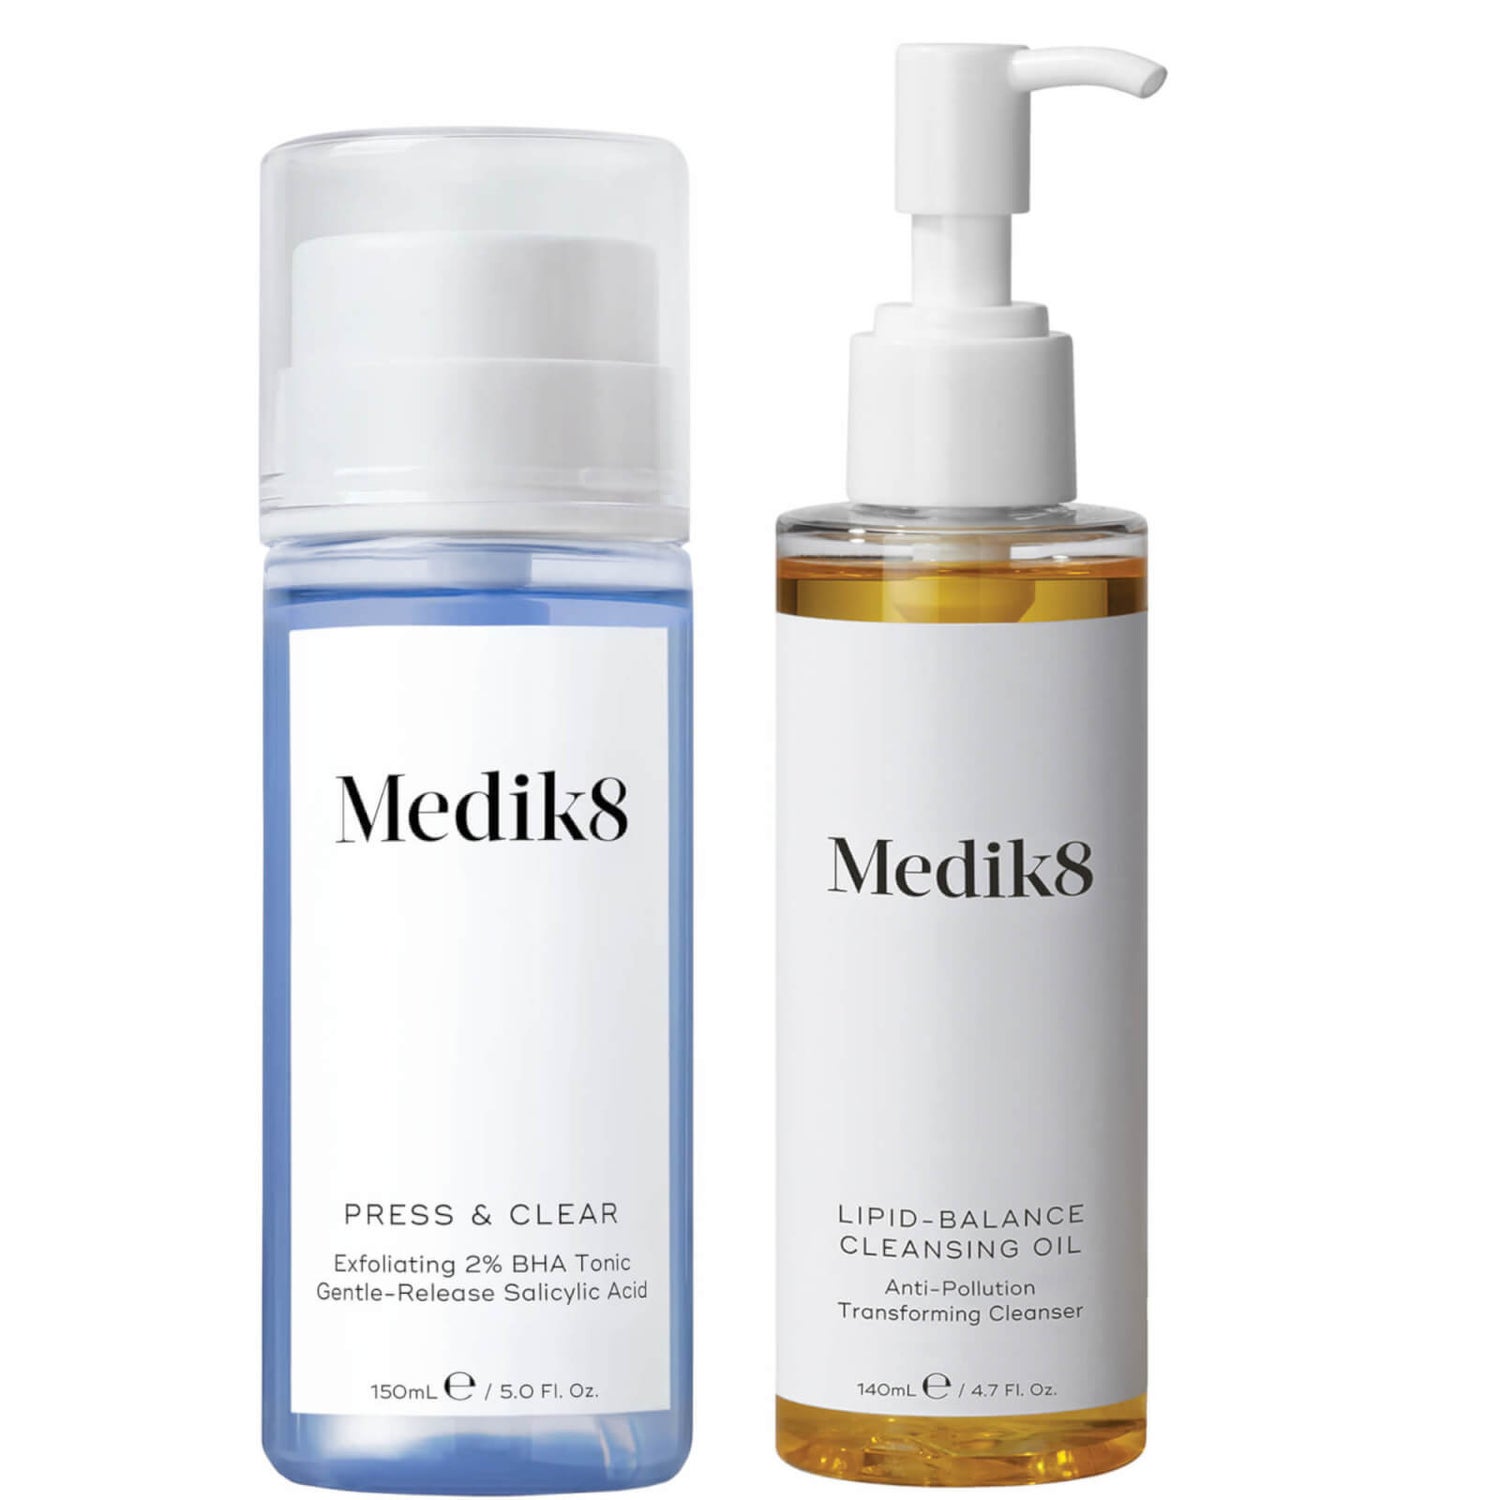 Medik8 Lipid Balance Cleansing Oil and Press and Clear